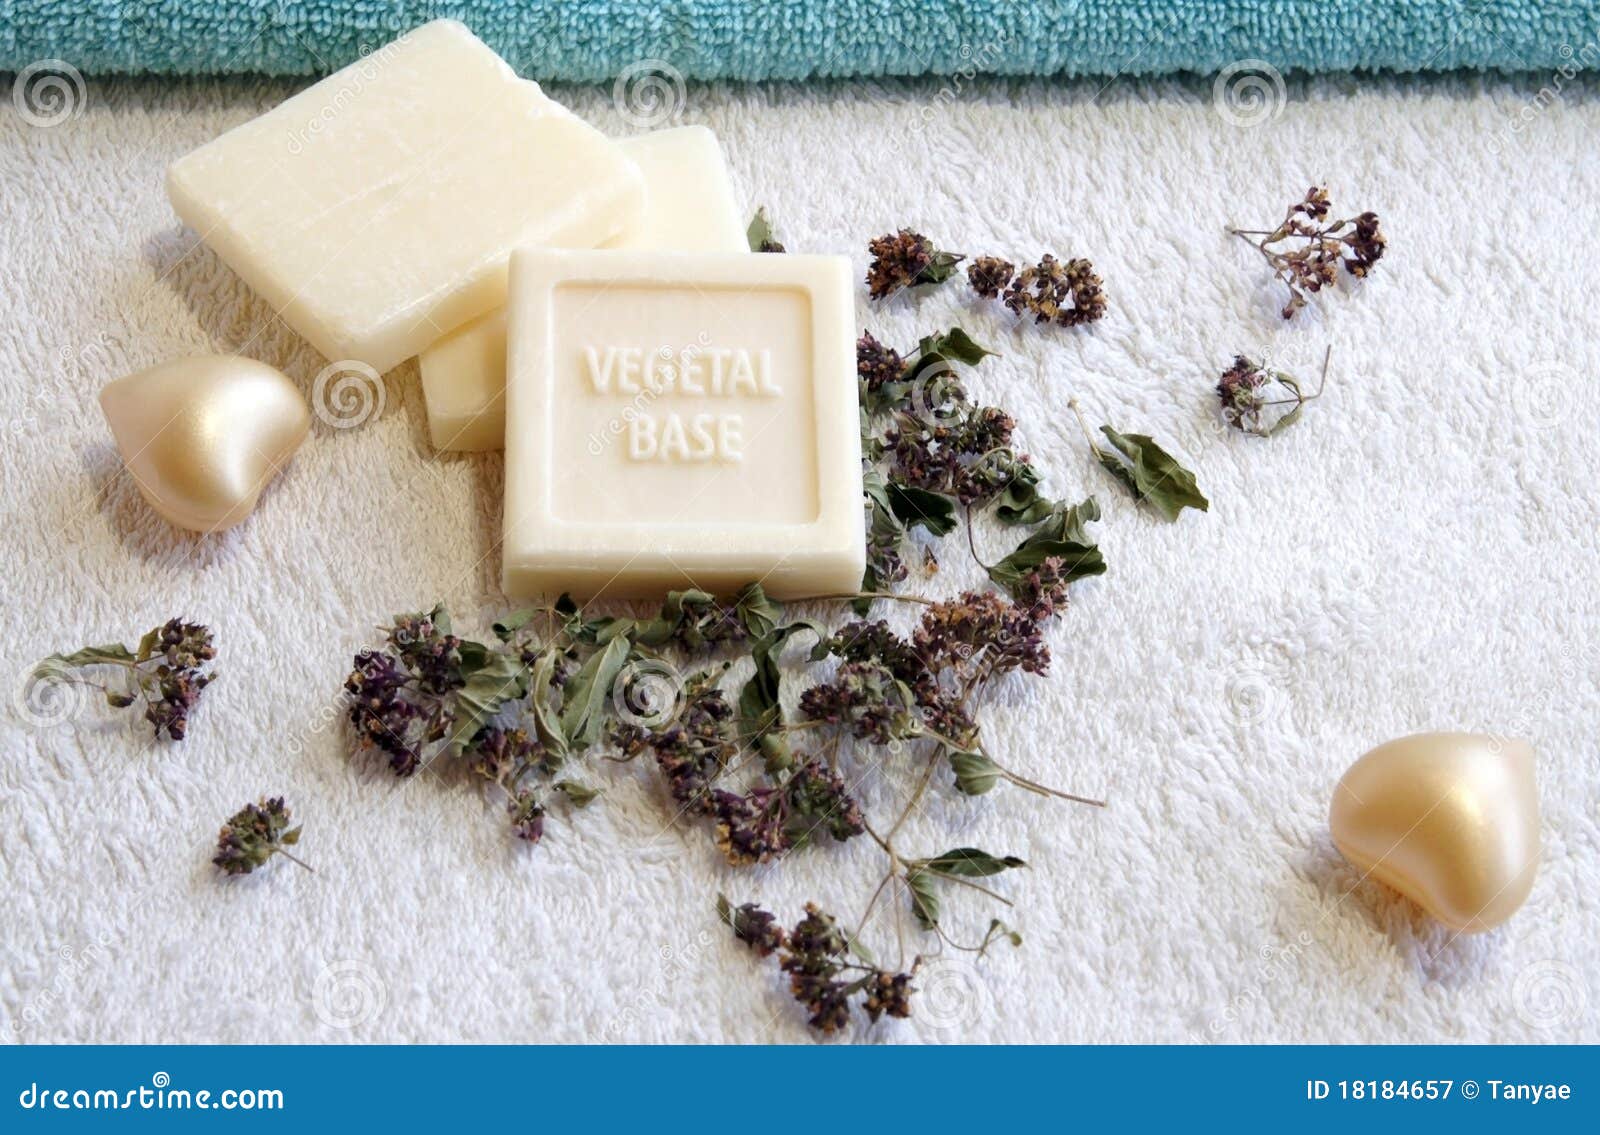 vegetal base soap for bath with herbs